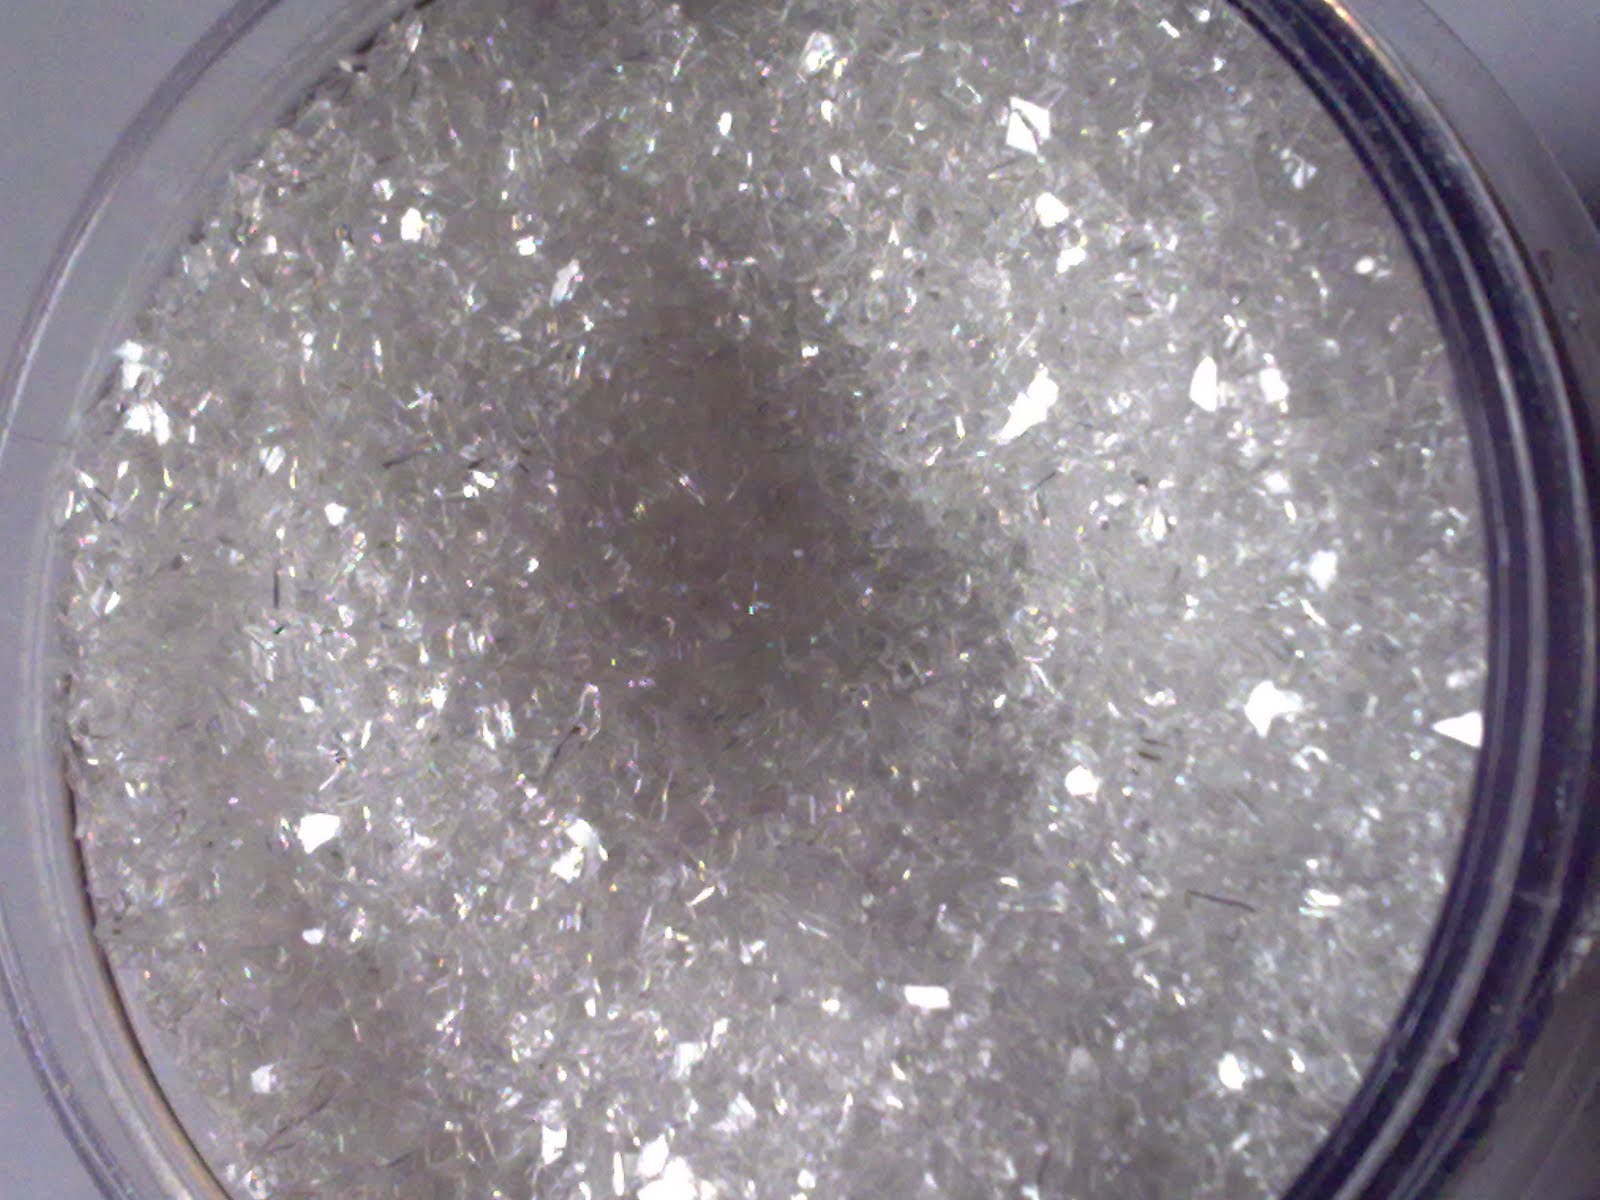 Diamond dust in a container